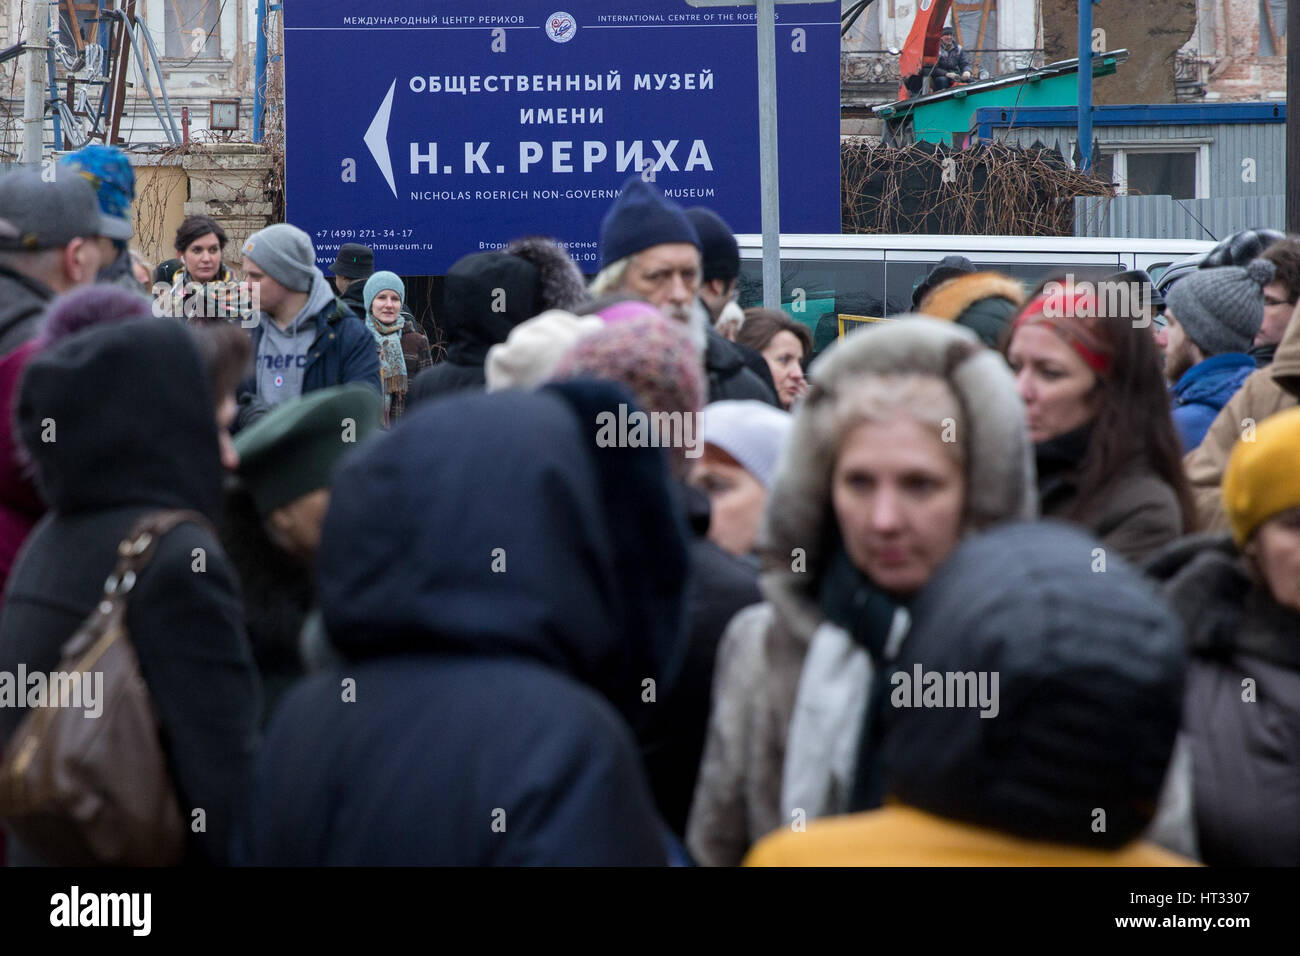 Moscow, Russia. 7th March 2017. People outside the International Centre of the Roerichs in Maly Znamensky Lane, the building blocked off and searched by police in connection with the Master Bank bankruptcy case. Credit: Victor Vytolskiy/Alamy Live News Stock Photo